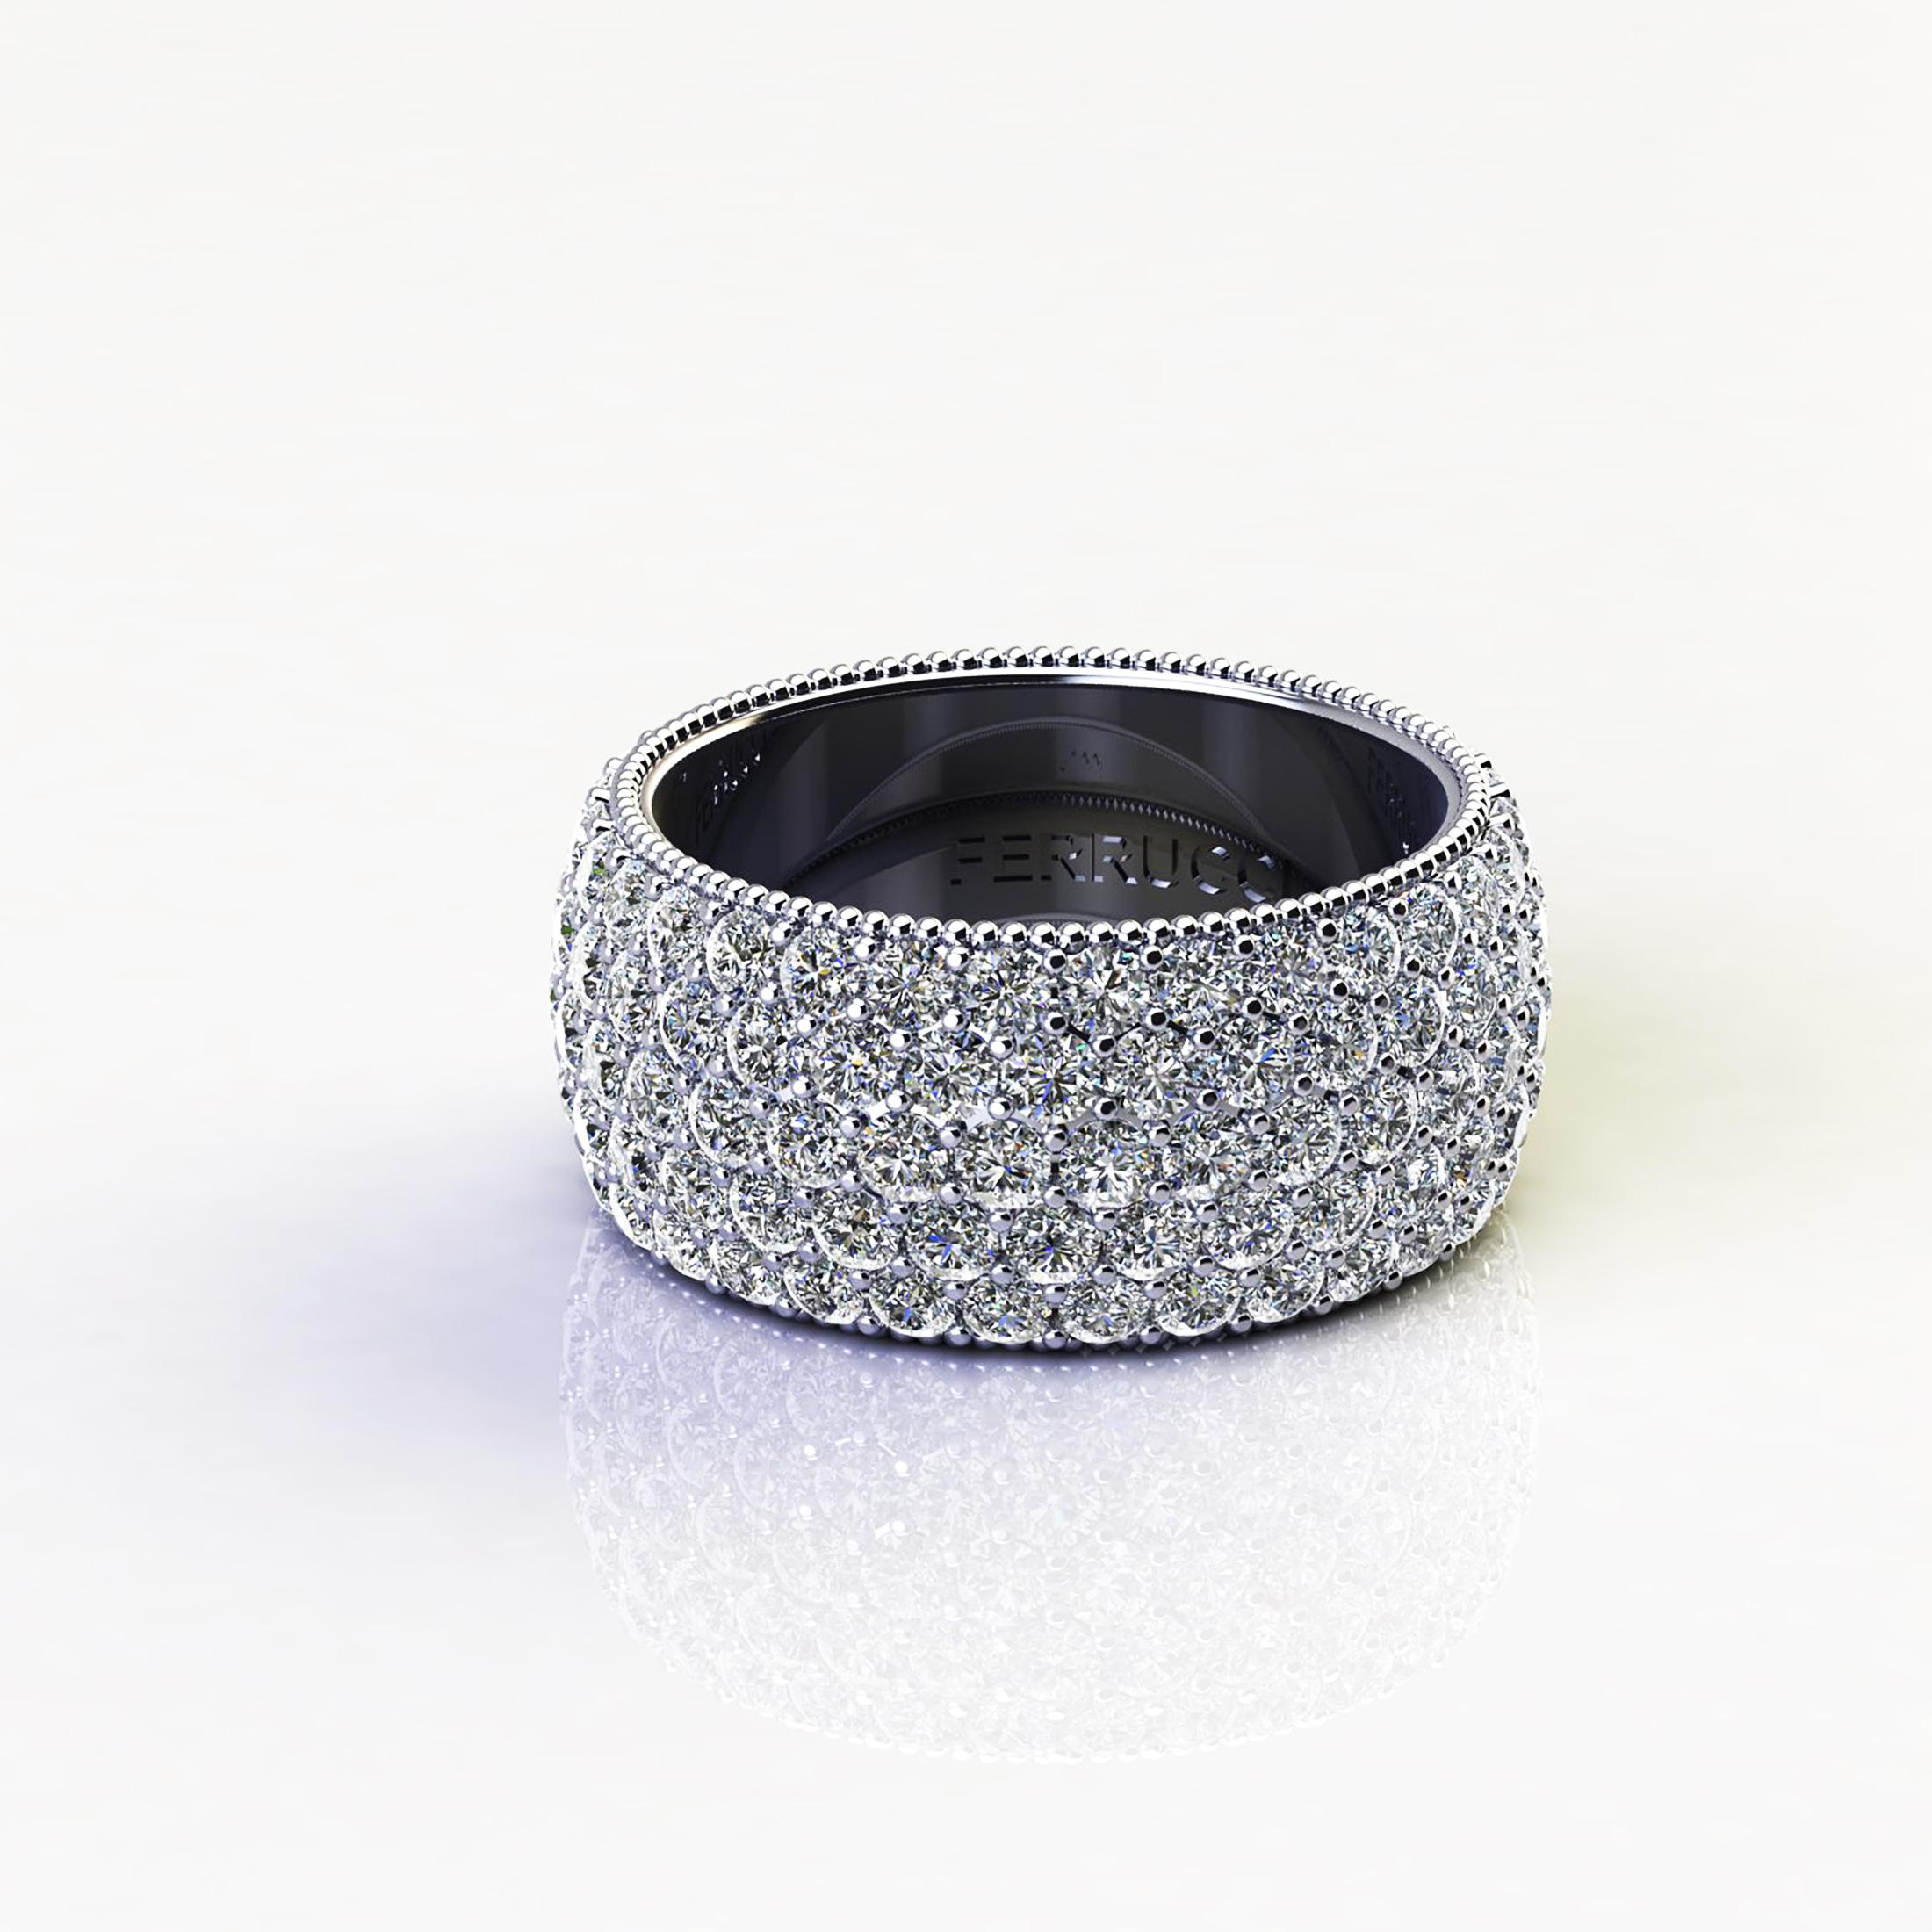 4.70 Carat Wide White Diamond Pavé Ring in 18 Karat White Gold In New Condition For Sale In New York, NY